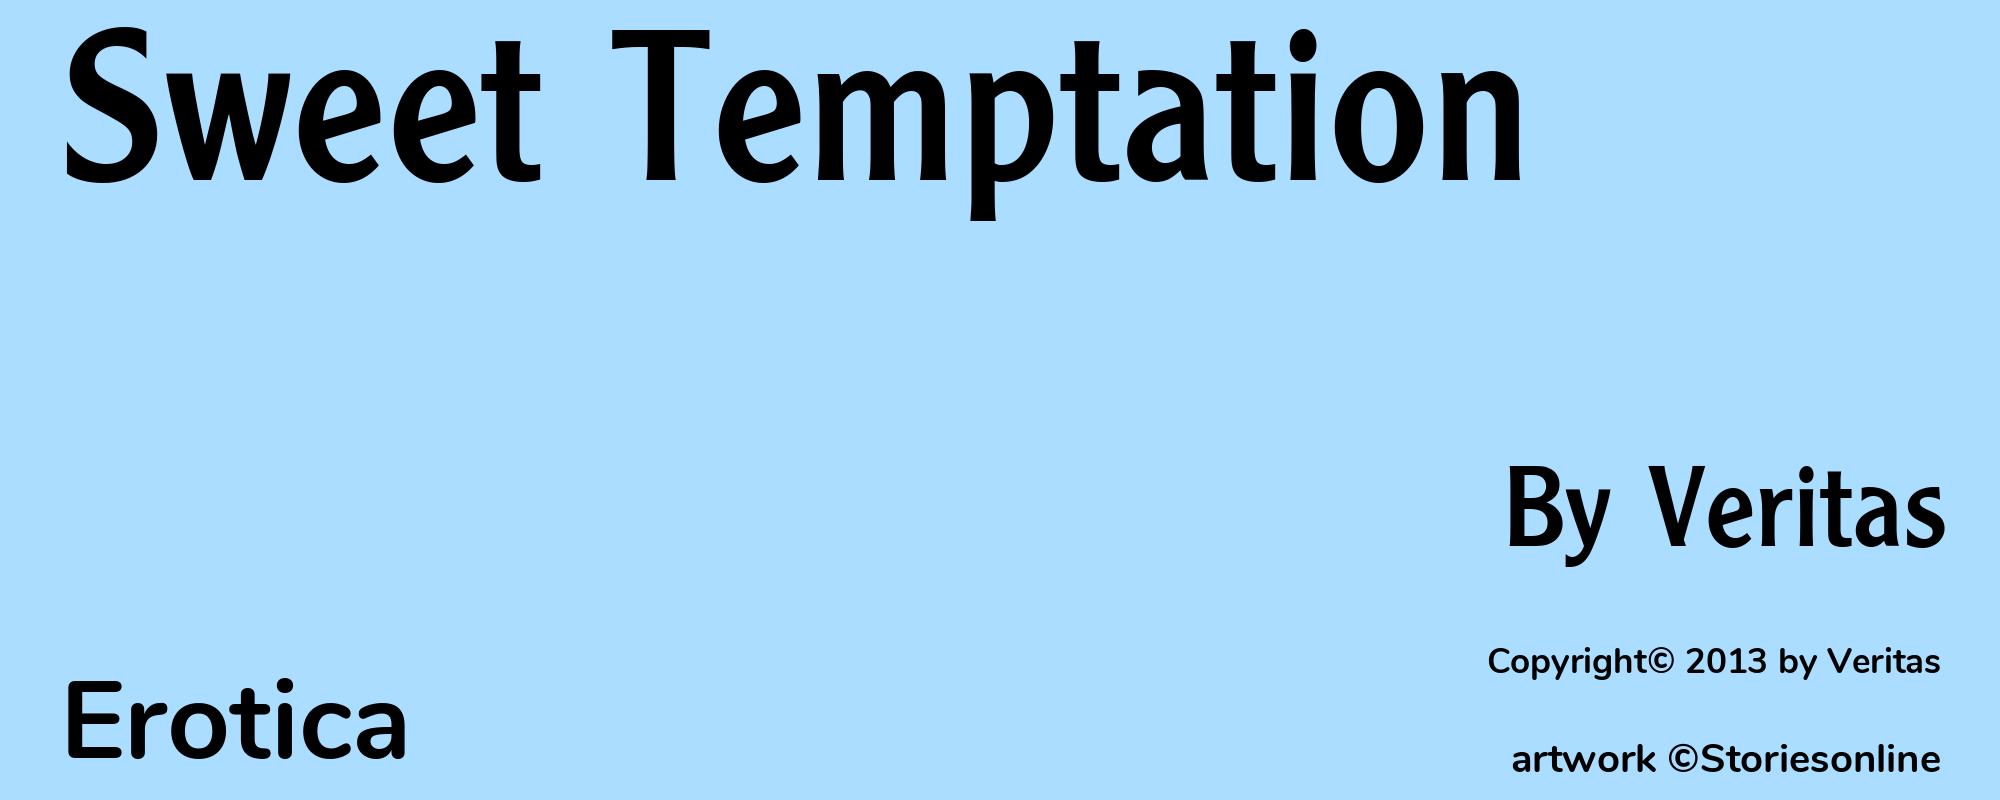 Sweet Temptation - Cover